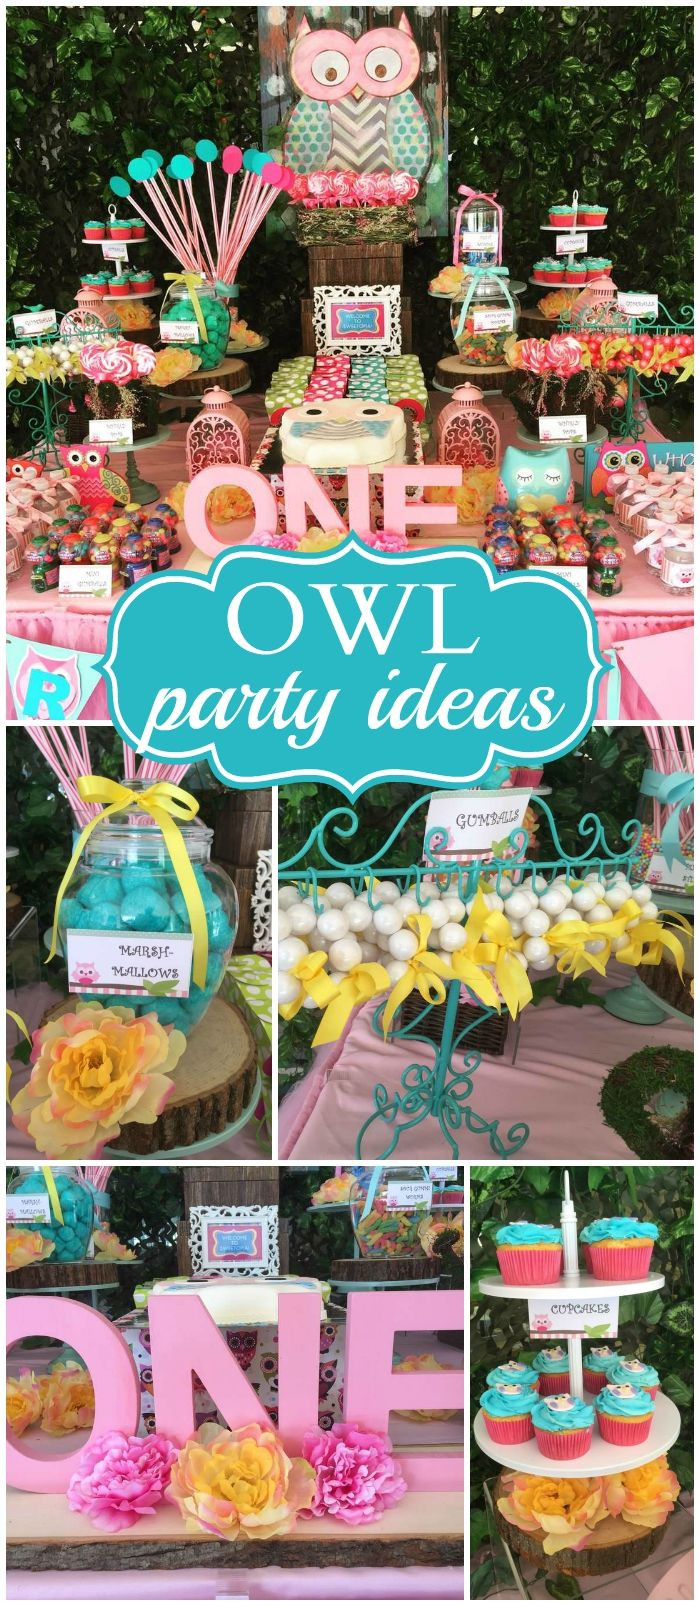 Owl Birthday Party Decorations
 Owls Birthday "Look Whoo s Turning e"